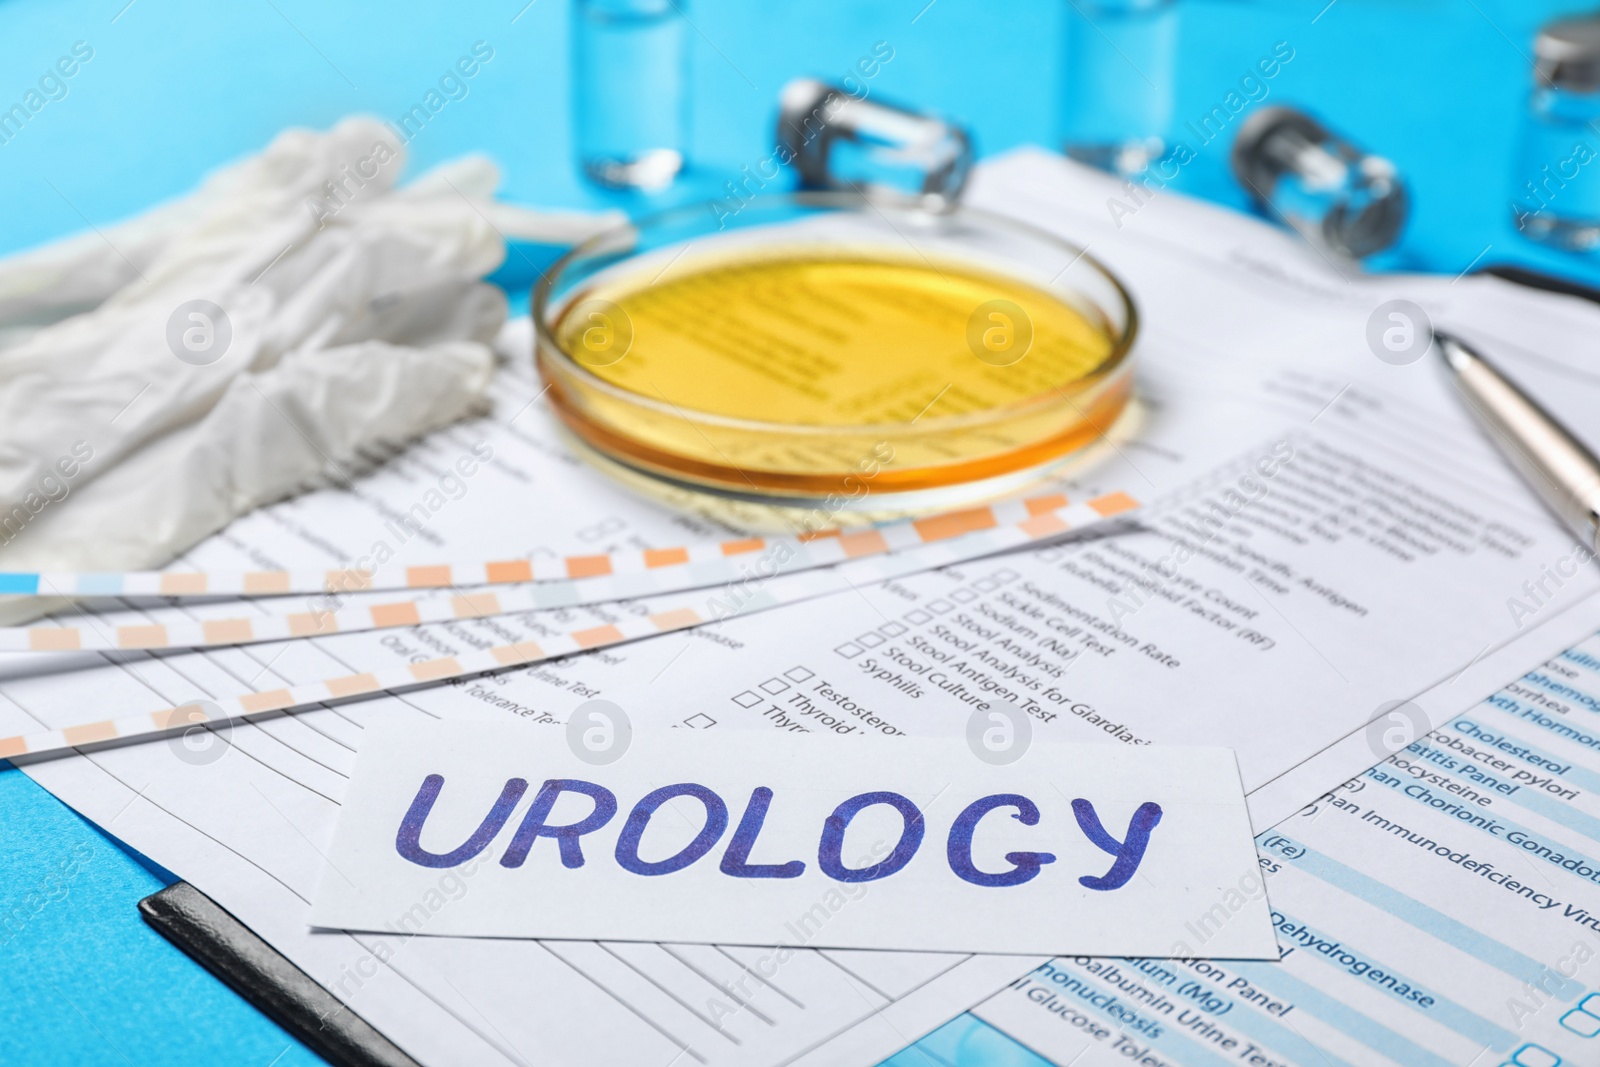 Photo of Composition with word "Urology" and test forms on color background